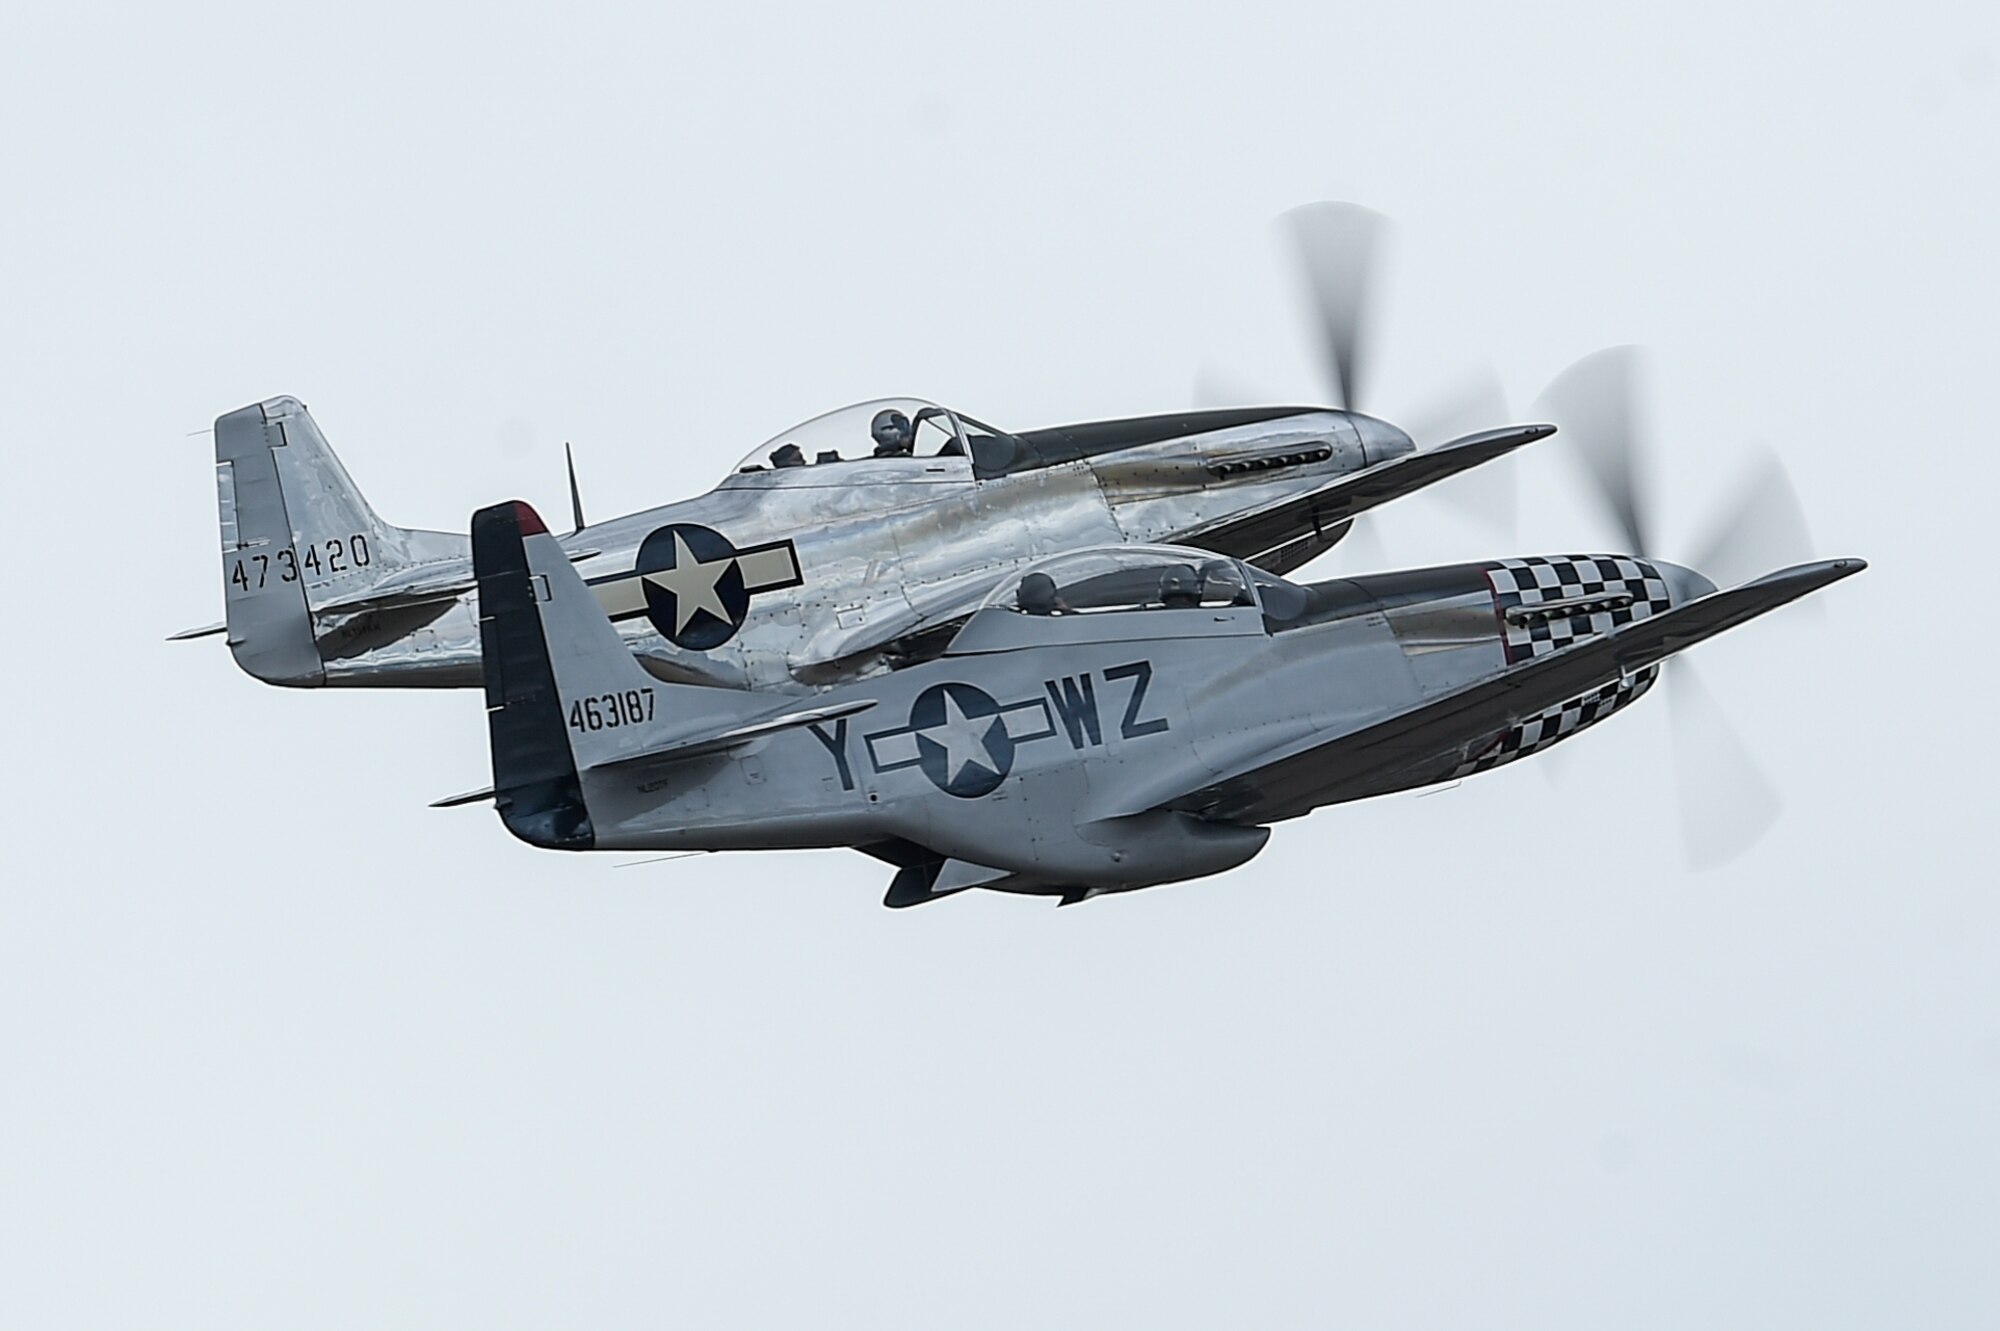 A TF-51 and P-51 Mustang fly together during the 2017 Heritage Flight Training and Certification Course at Davis-Monthan Air Force Base, Ariz., Feb. 12, 2017. The 20th annual training event has been held at D-M since 2001 and features aerial demonstrations from historical and modern fighter aircraft. (U.S. Air Force photo by Senior Airman Chris Drzazgowski)